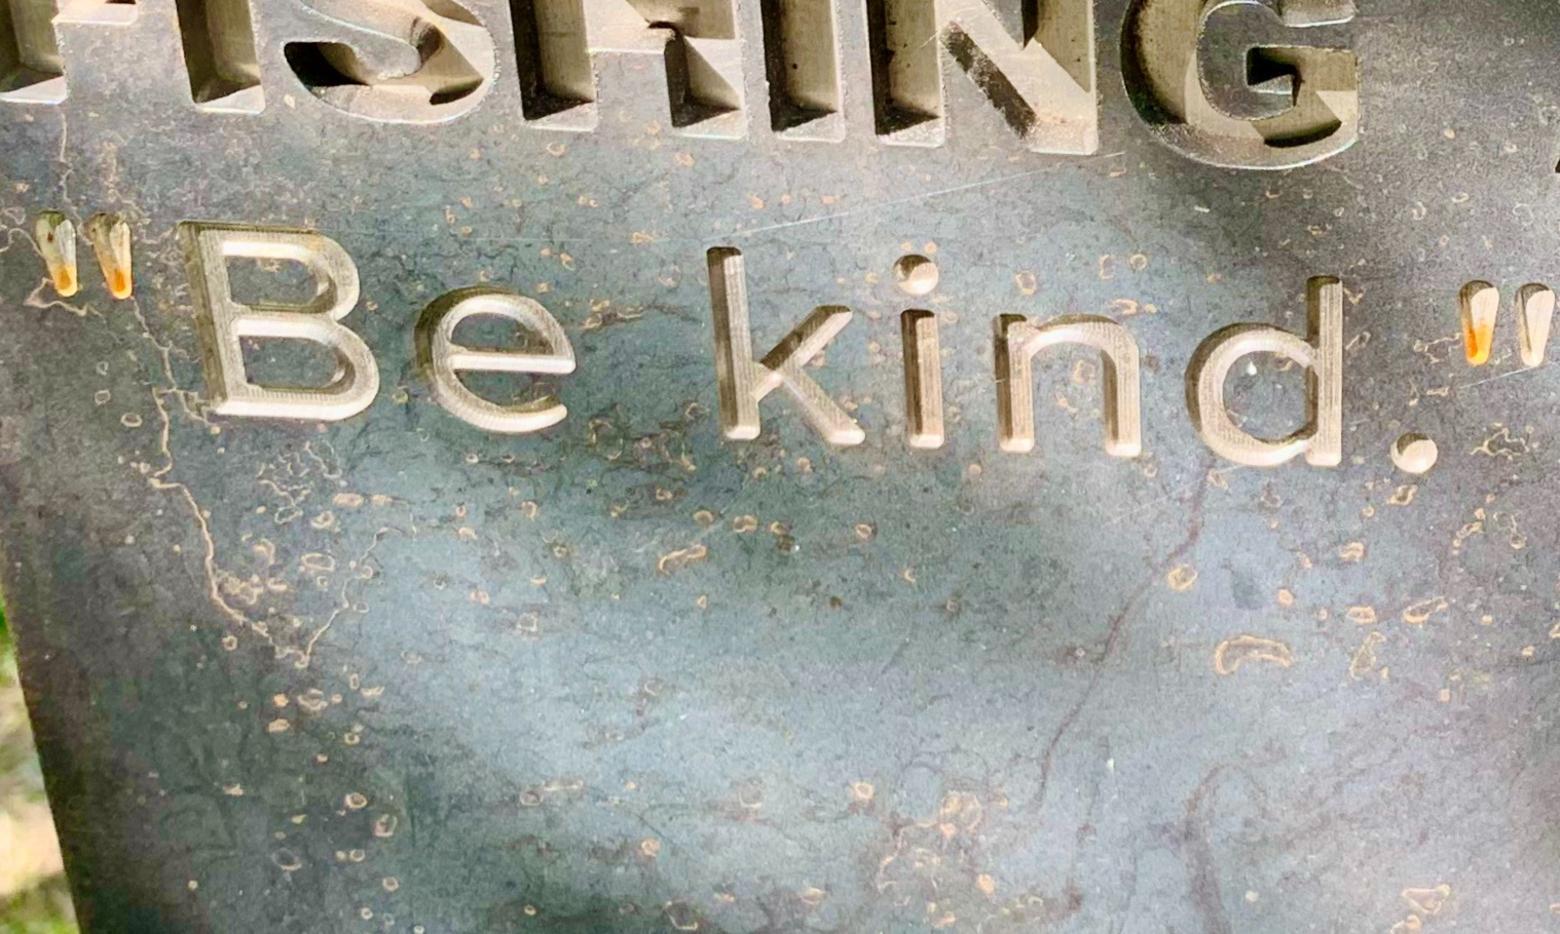 Words chiseled in stone to live by found at the Alex Diekmann Fishing Access Site in Bozeman's Story Mill Park.